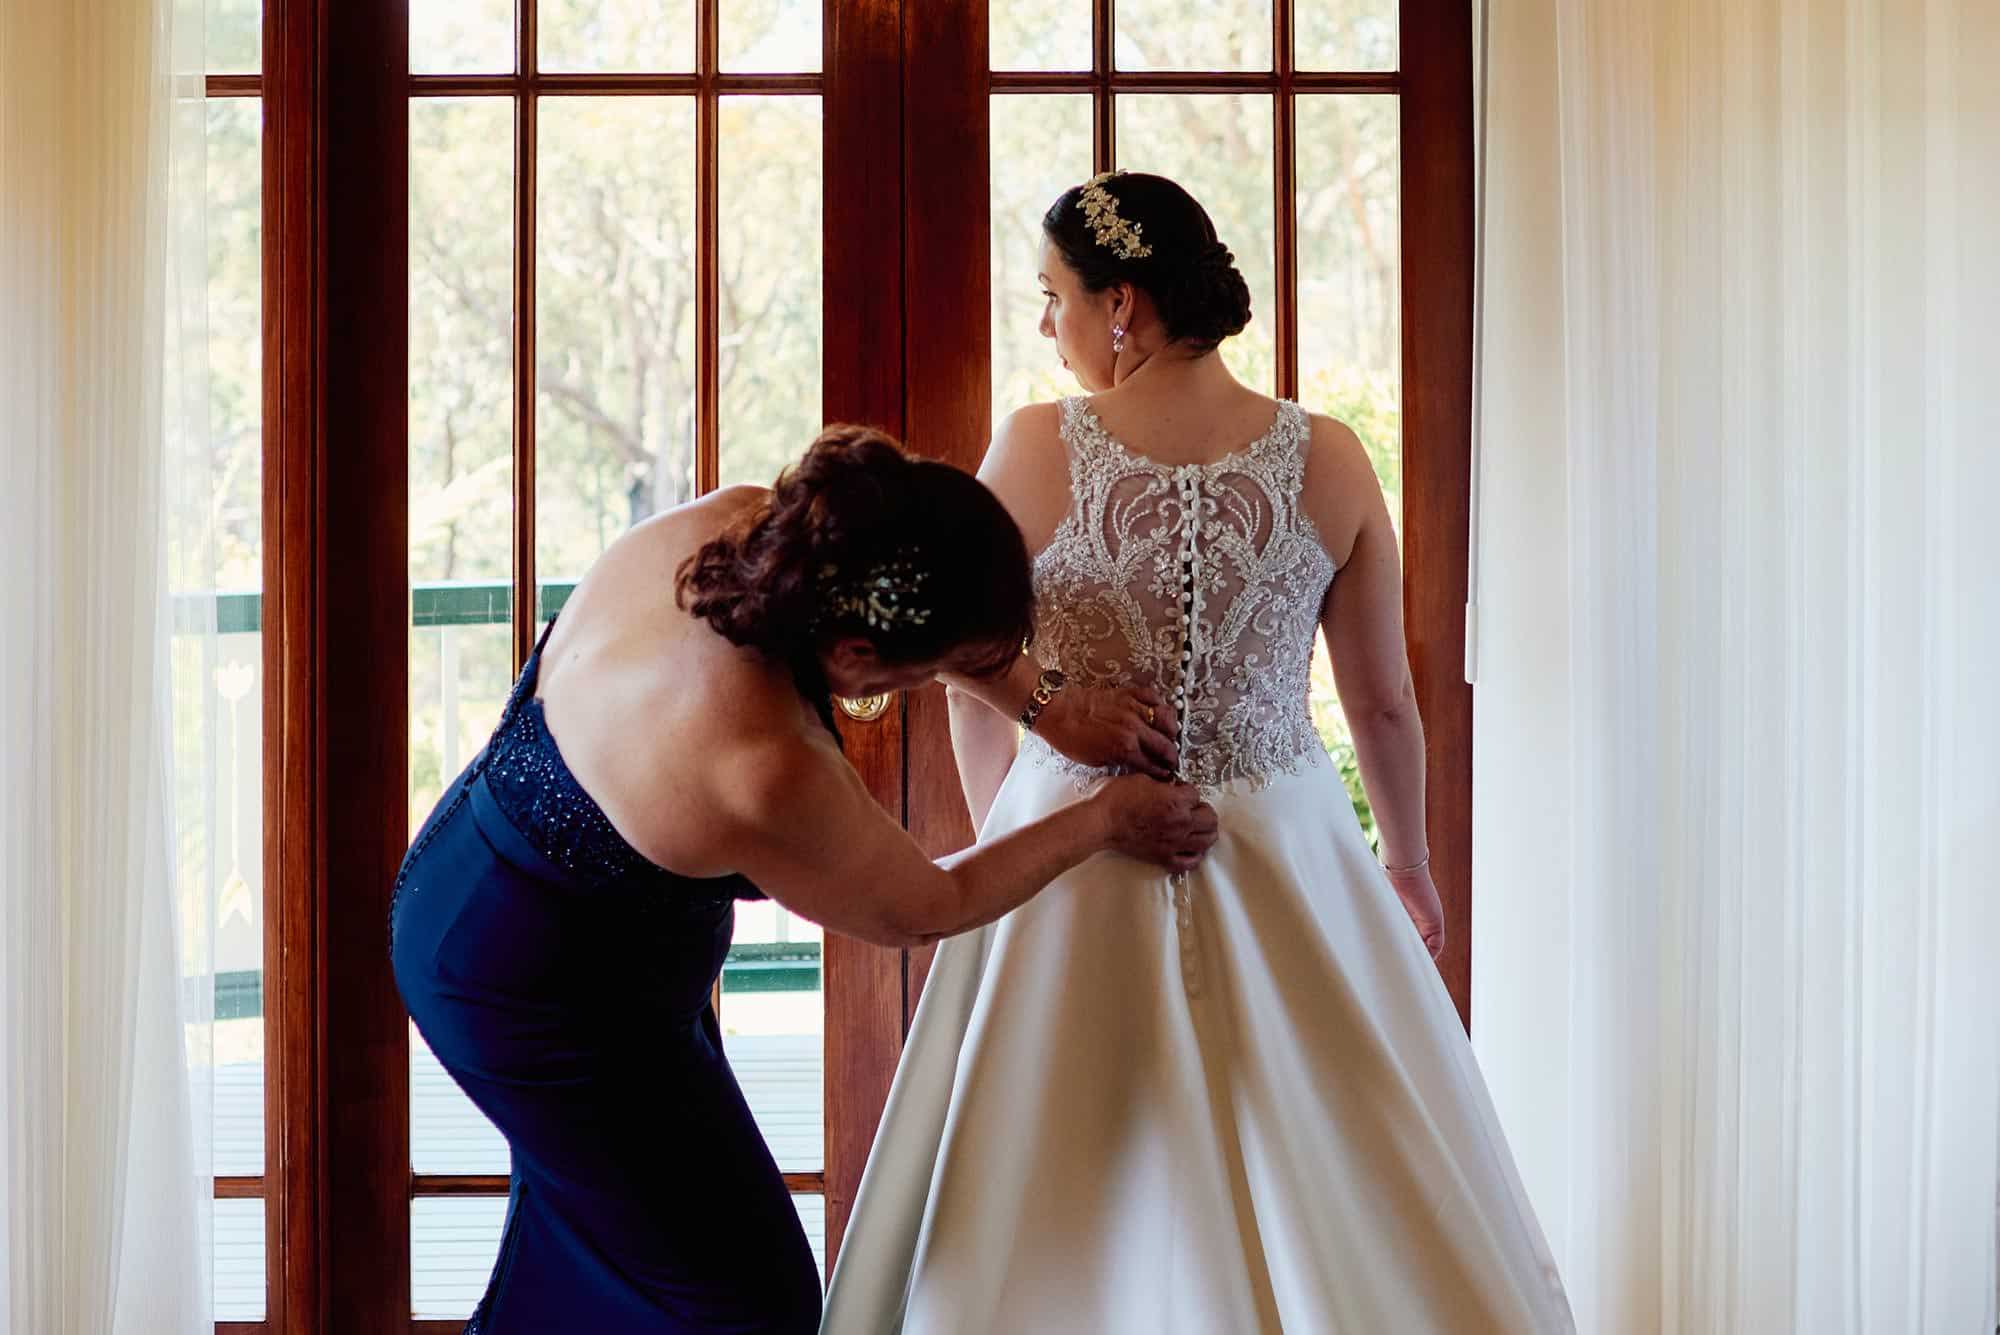 Buttoning up the bride's dress